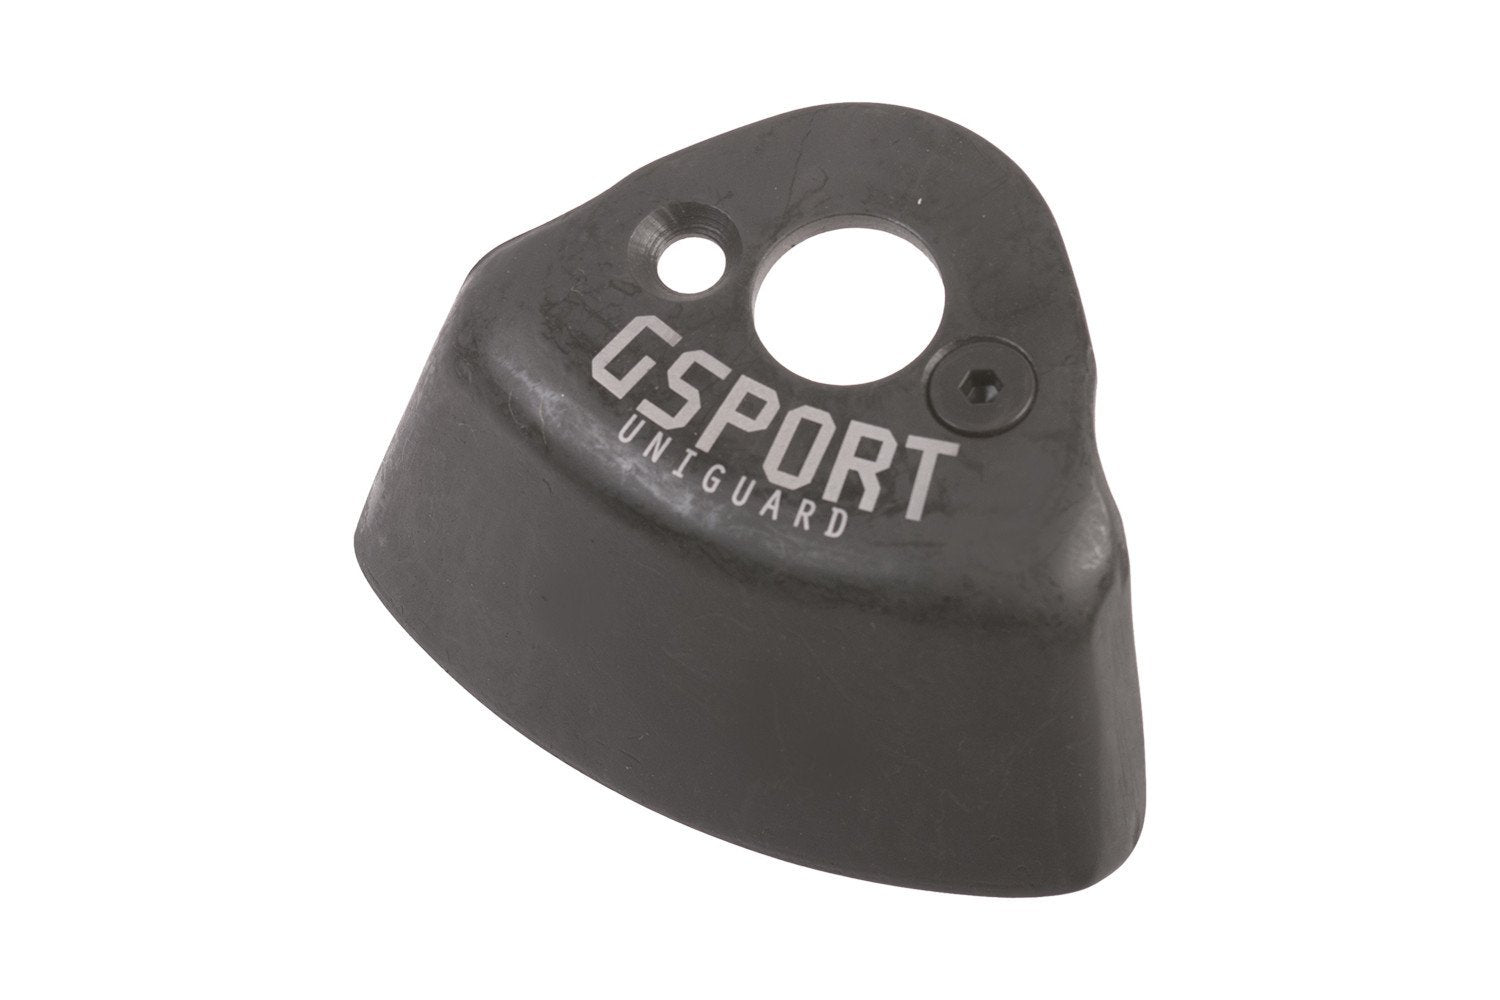 GSport Uniguard Hub Guard (3/8 OR 14MM) - Downtown Bicycle Works 